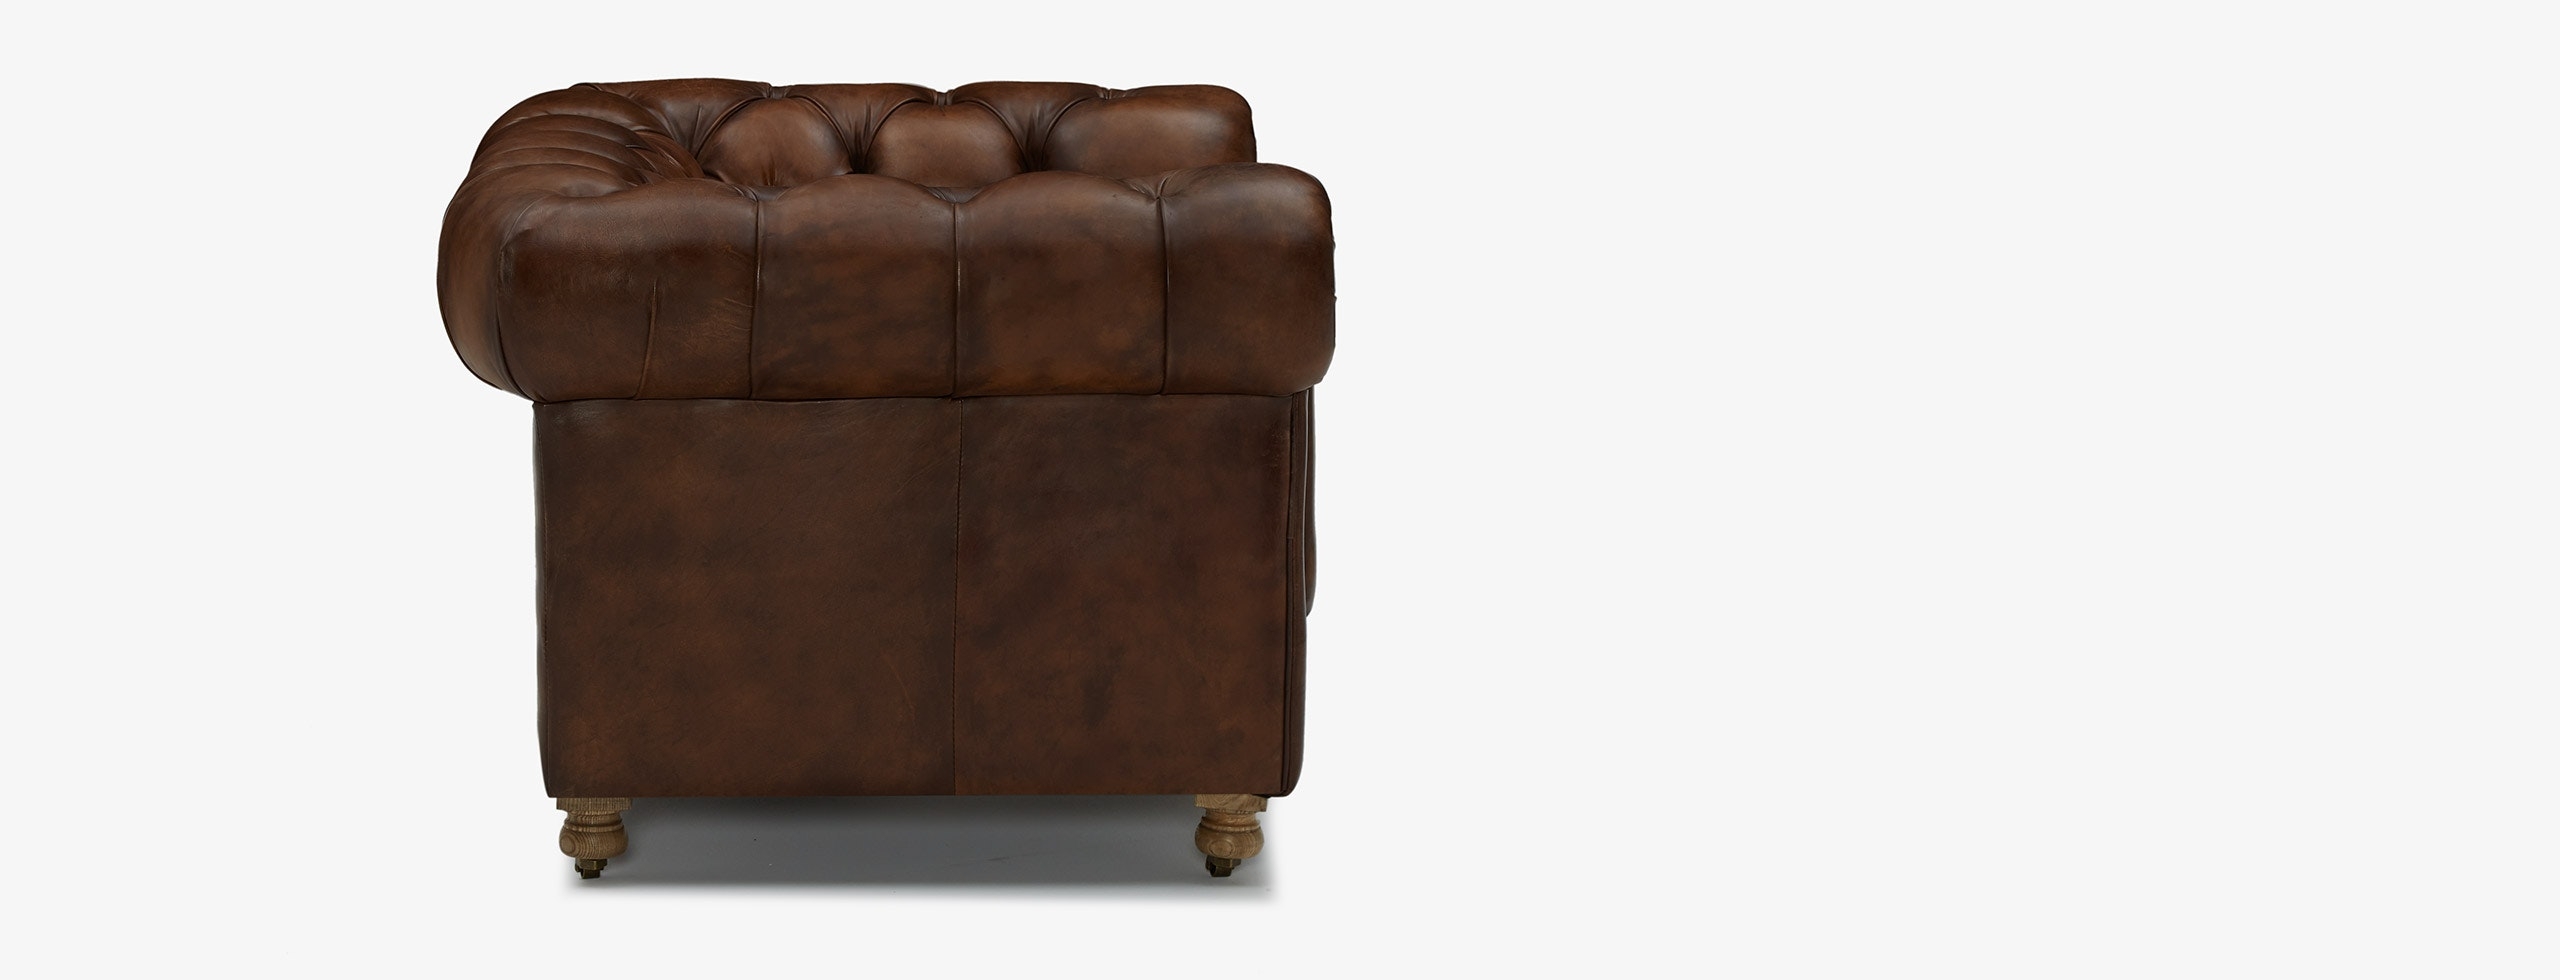 Liam Leather Chair - Palermo Coffee - Image 1